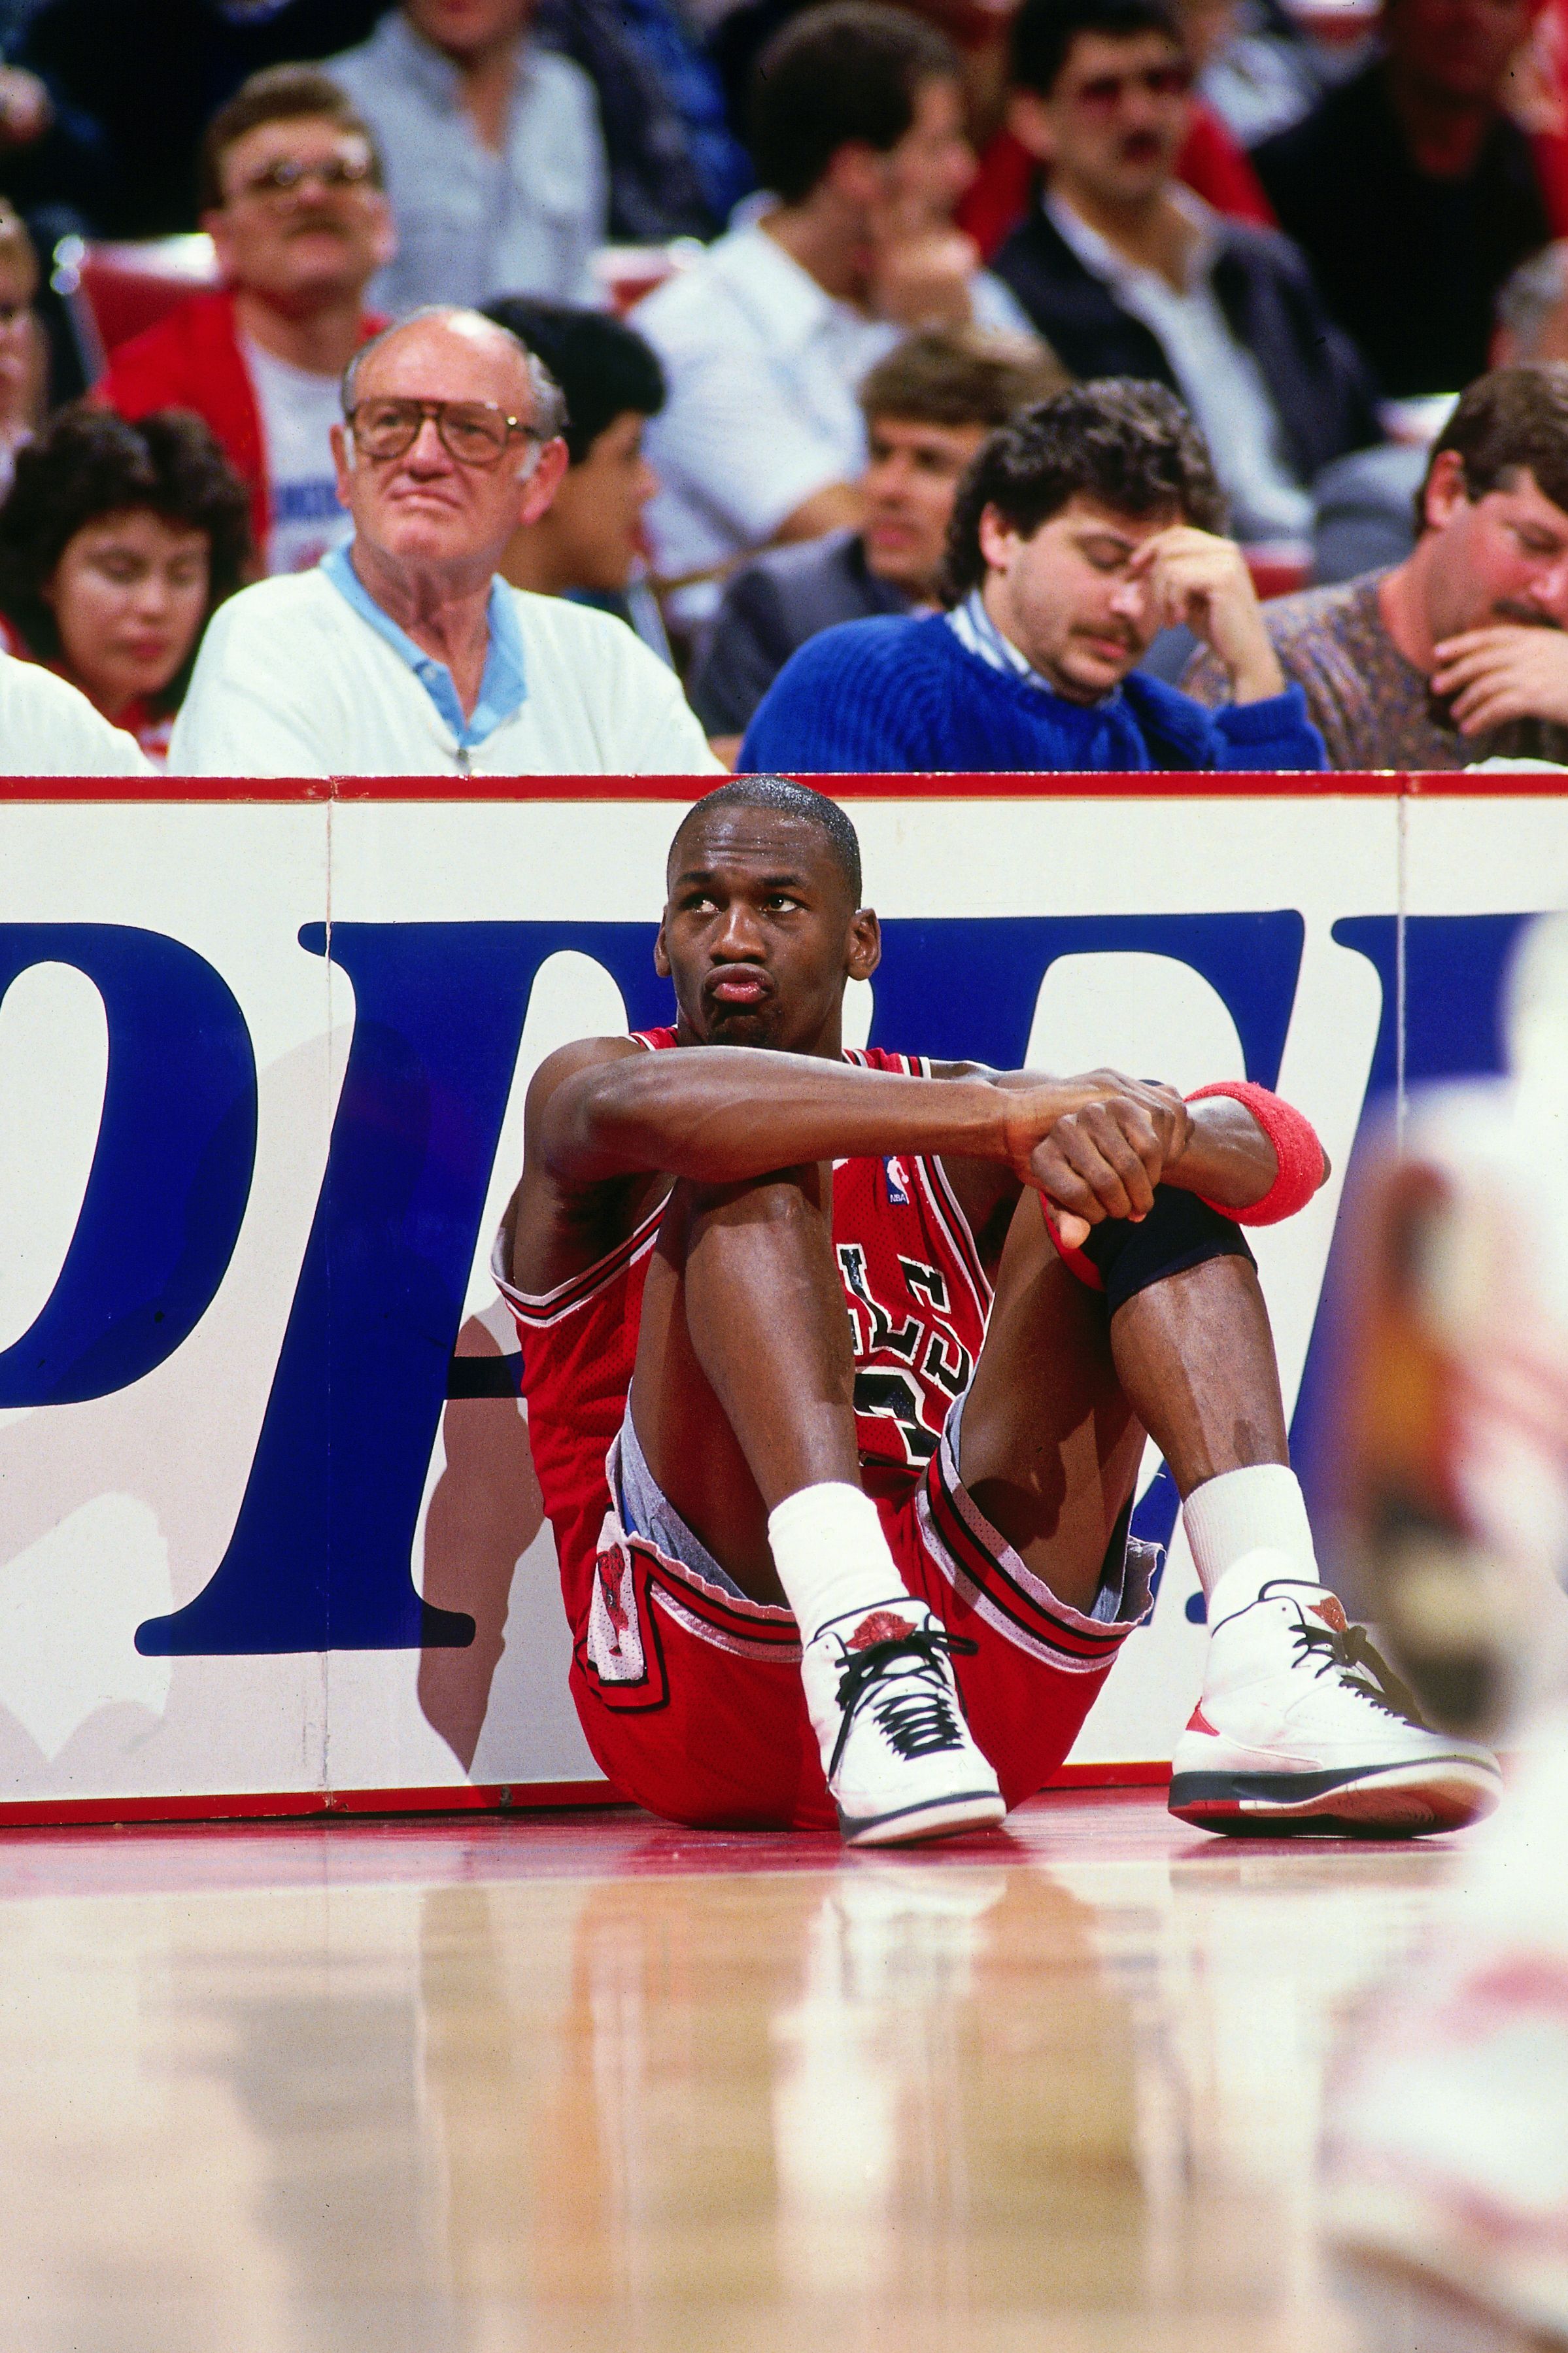 The Best OG Air Jordans That Mike Never Played In